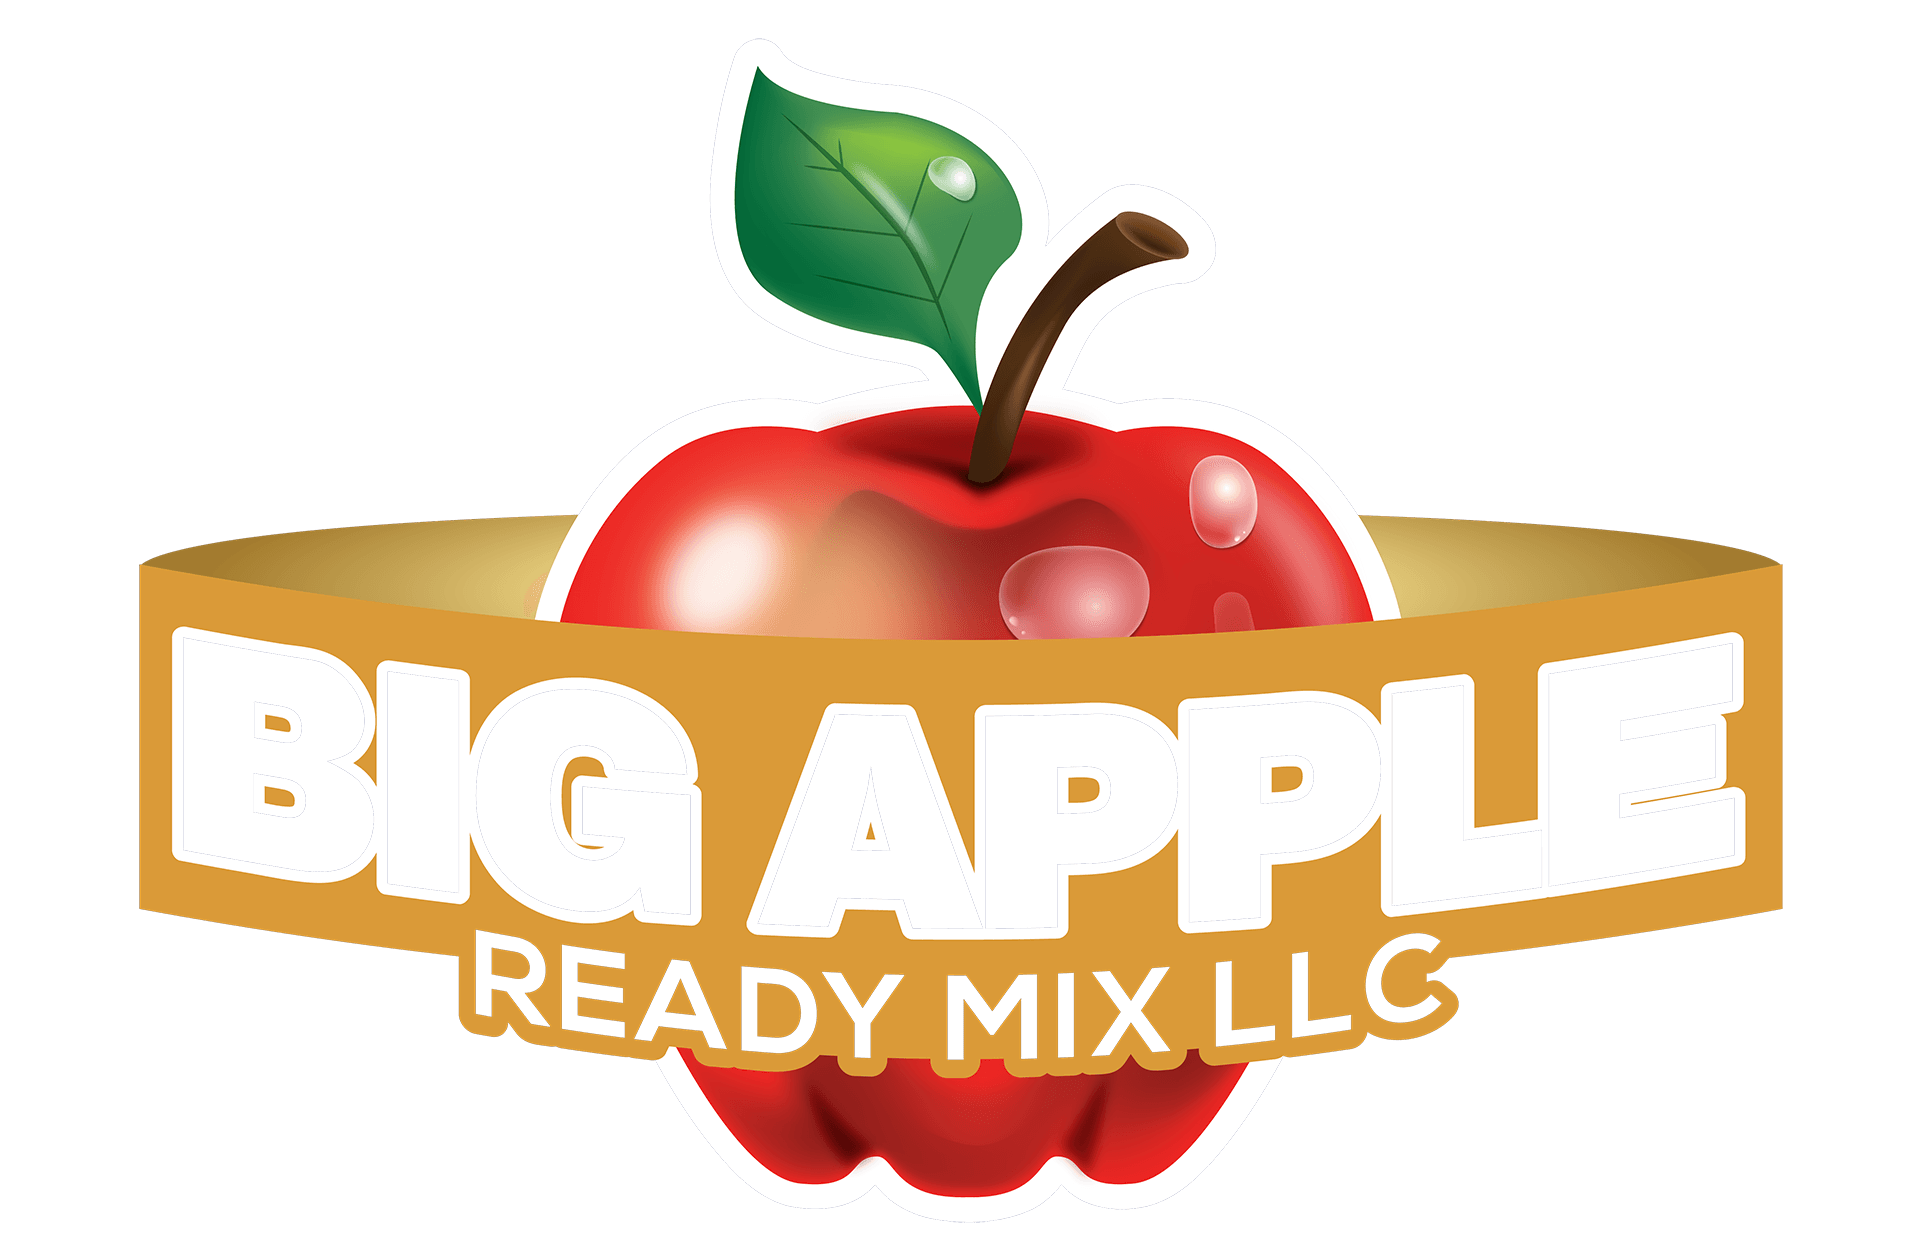 Big Apple Ready Mix - Ready Mix Concrete Supplier in Staten Island, NY